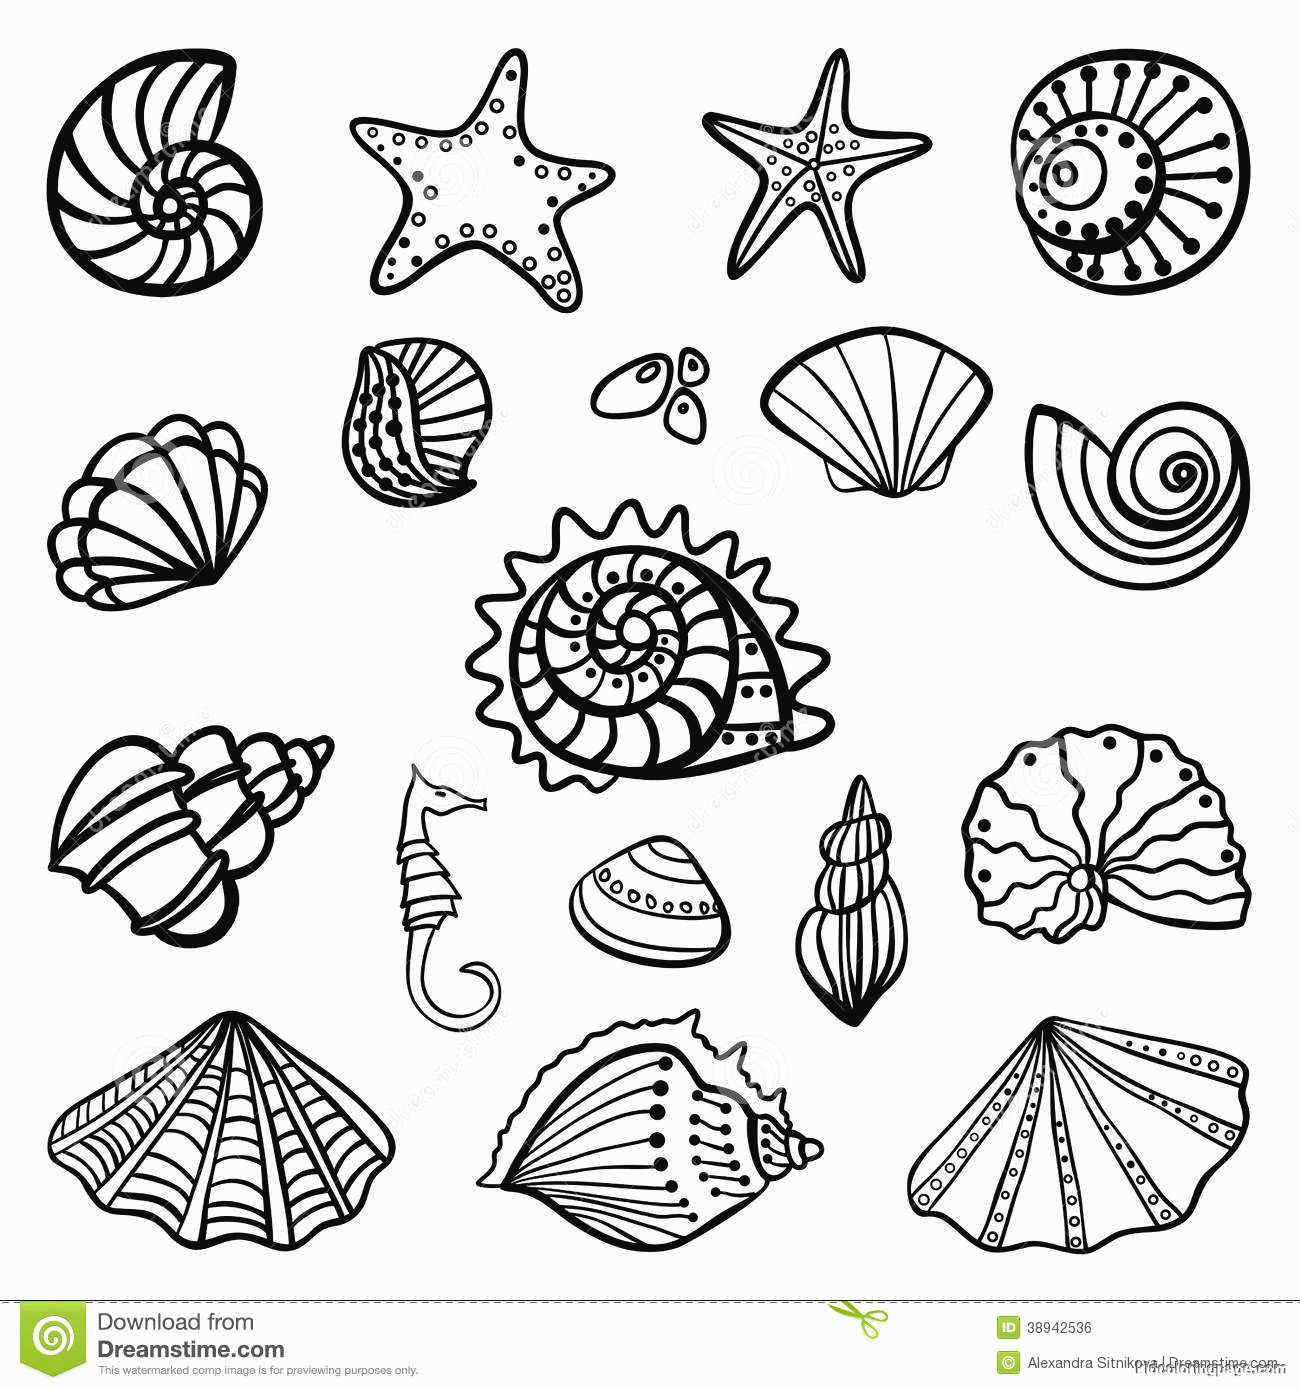 printable-seashell-pictures-pic-gubbins